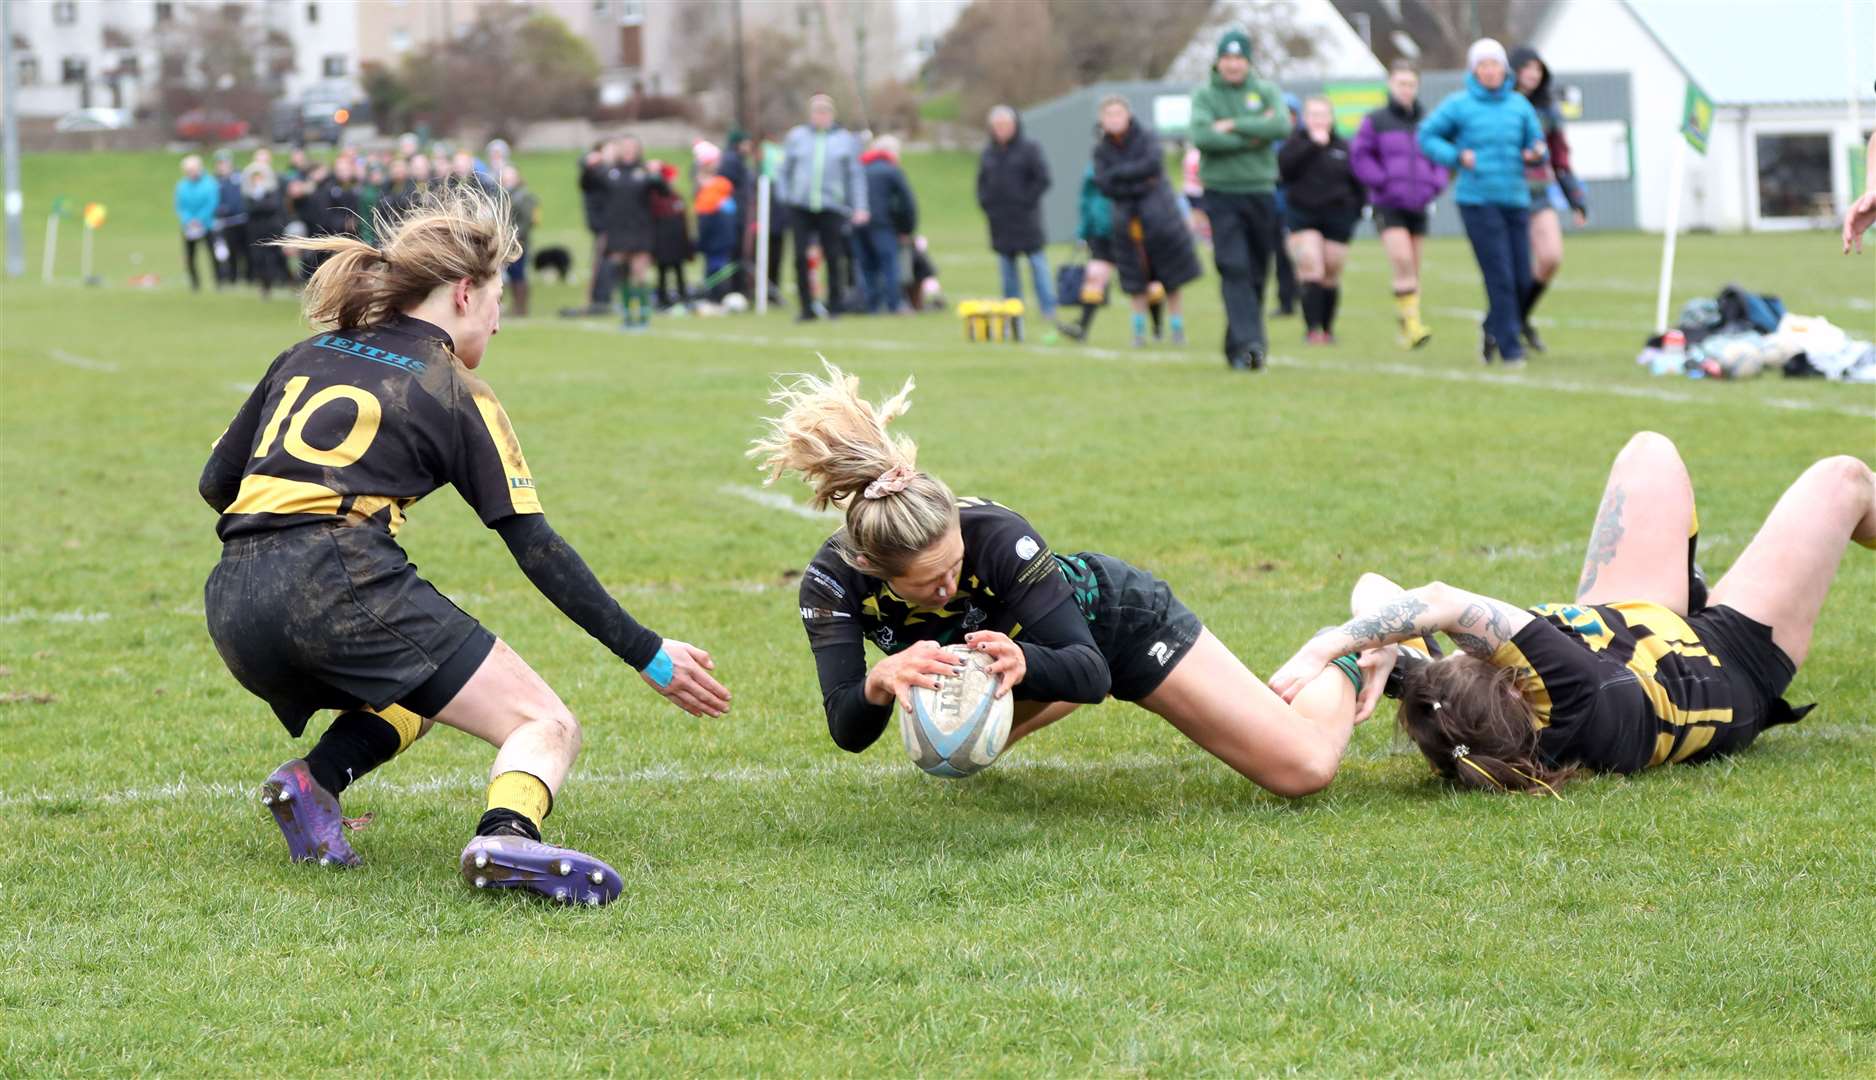 Emily Flavell scores a try for the Krakens despite being tackled. Picture: James Gunn